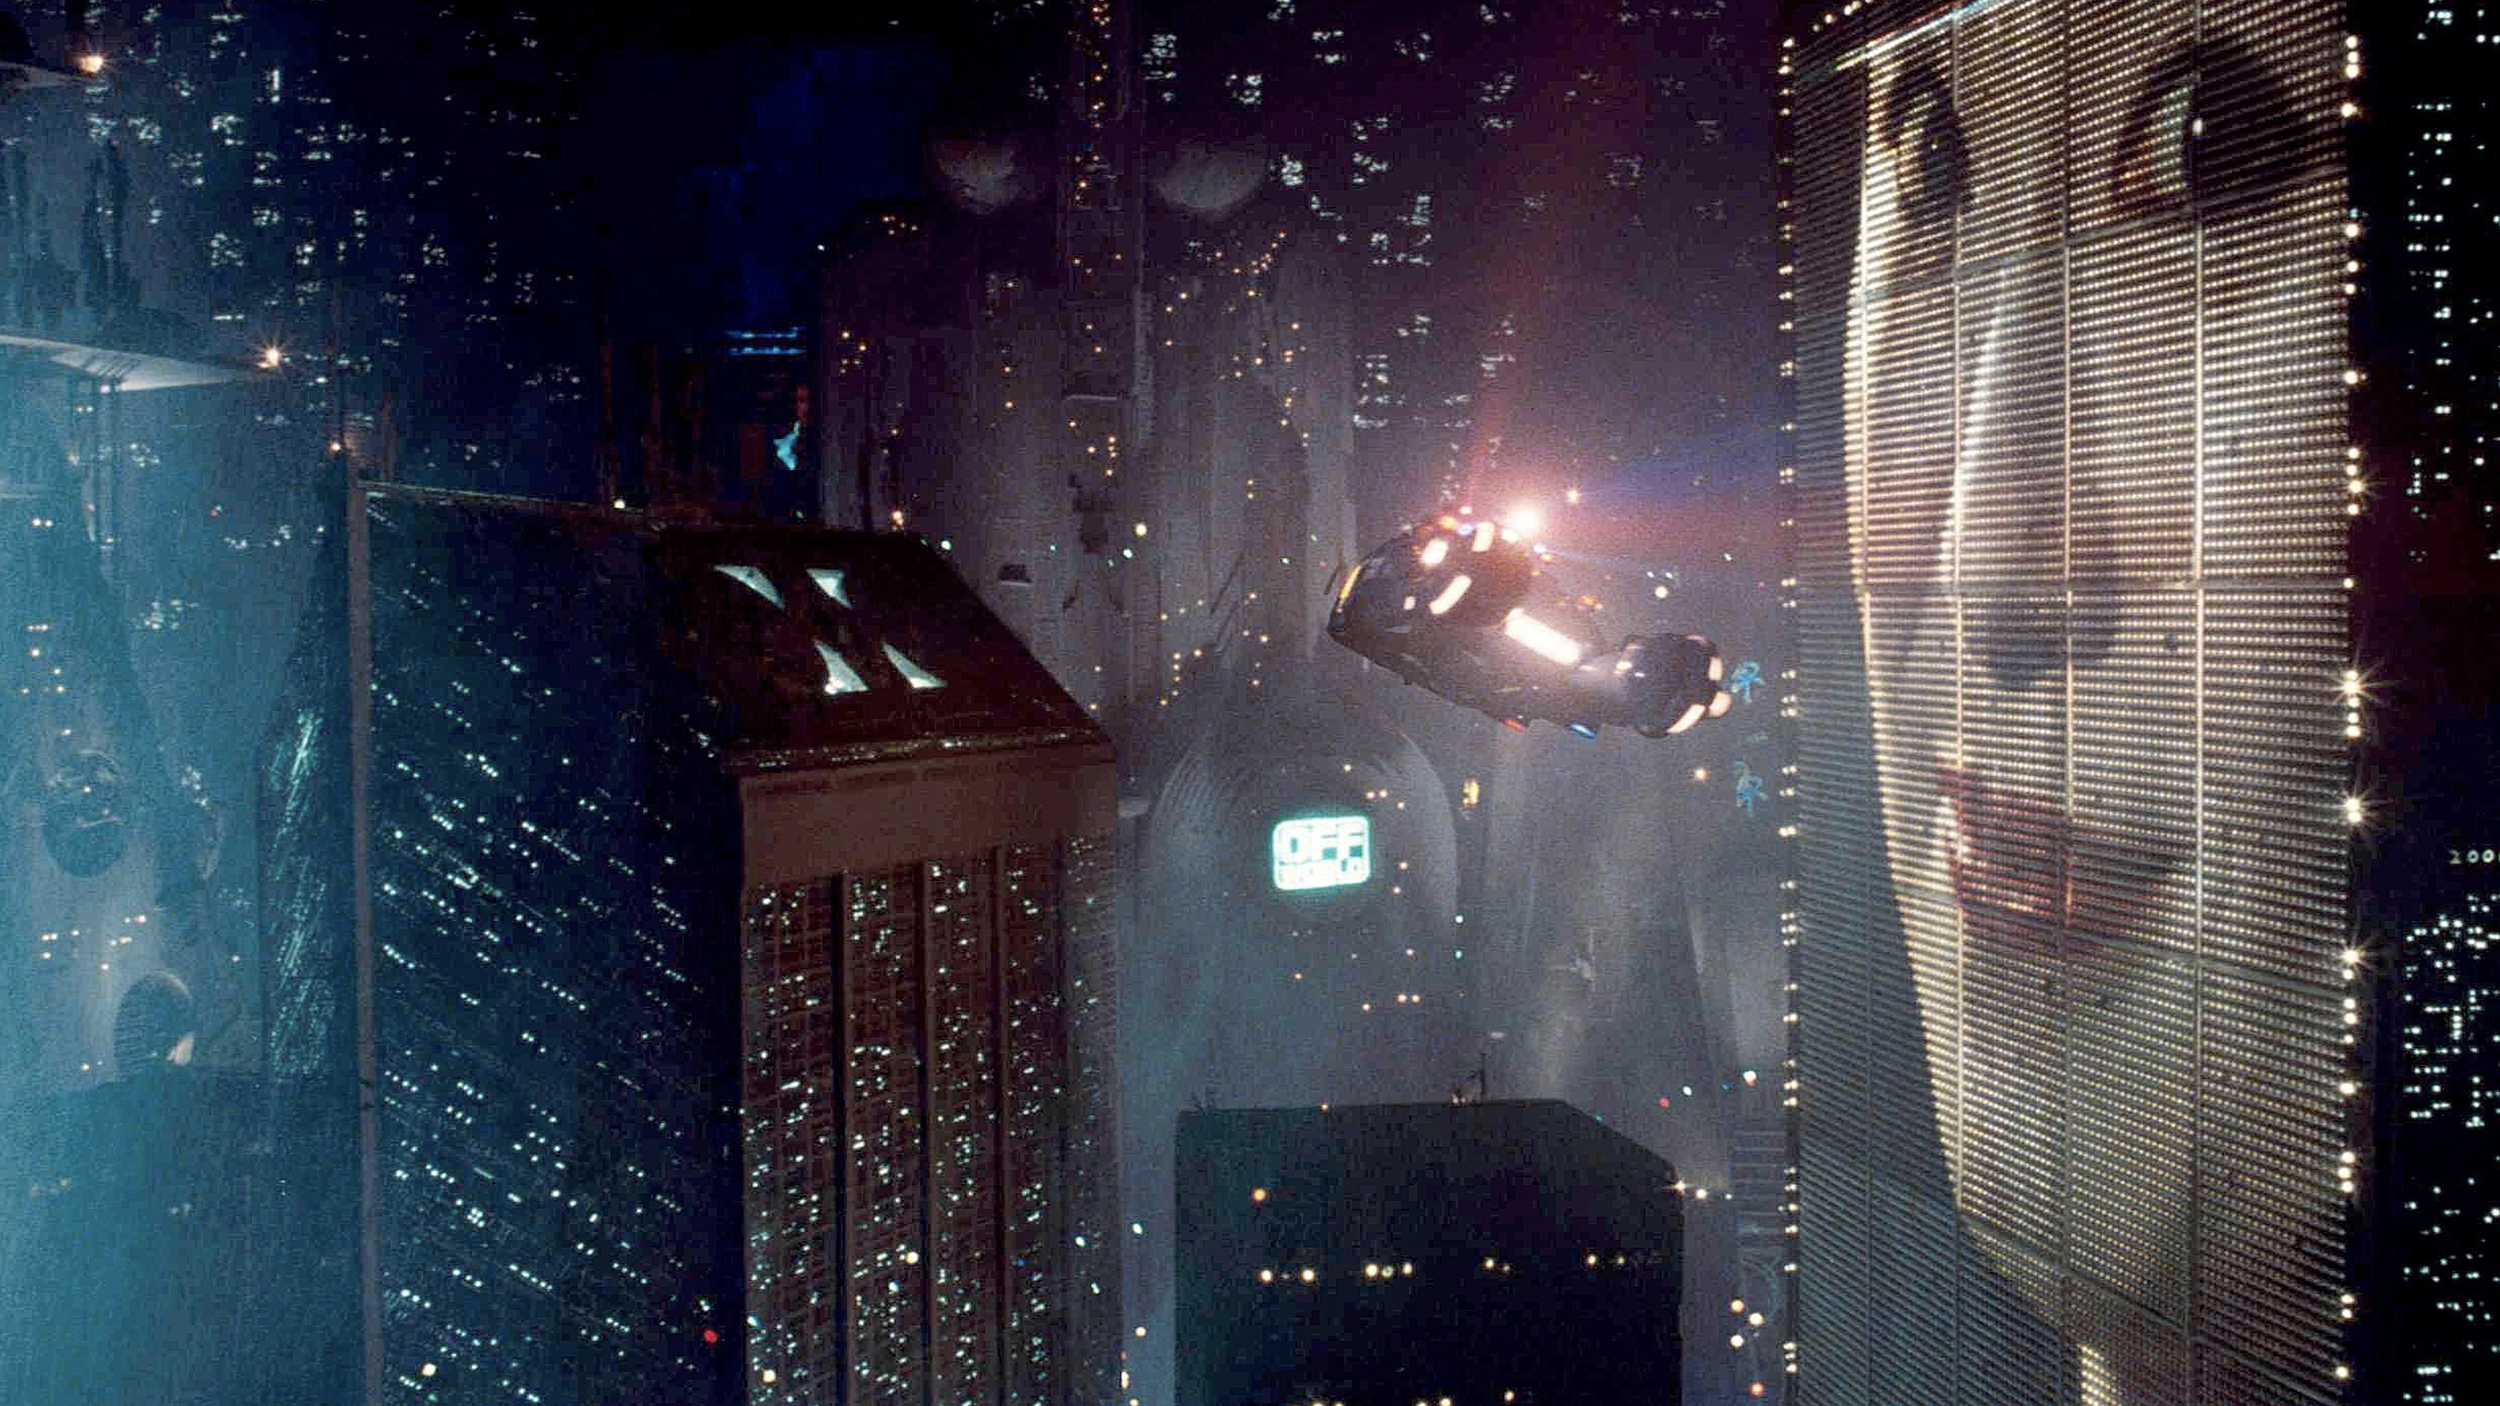 An image of a pop-culture city with a woman in the sky, representing future visions.